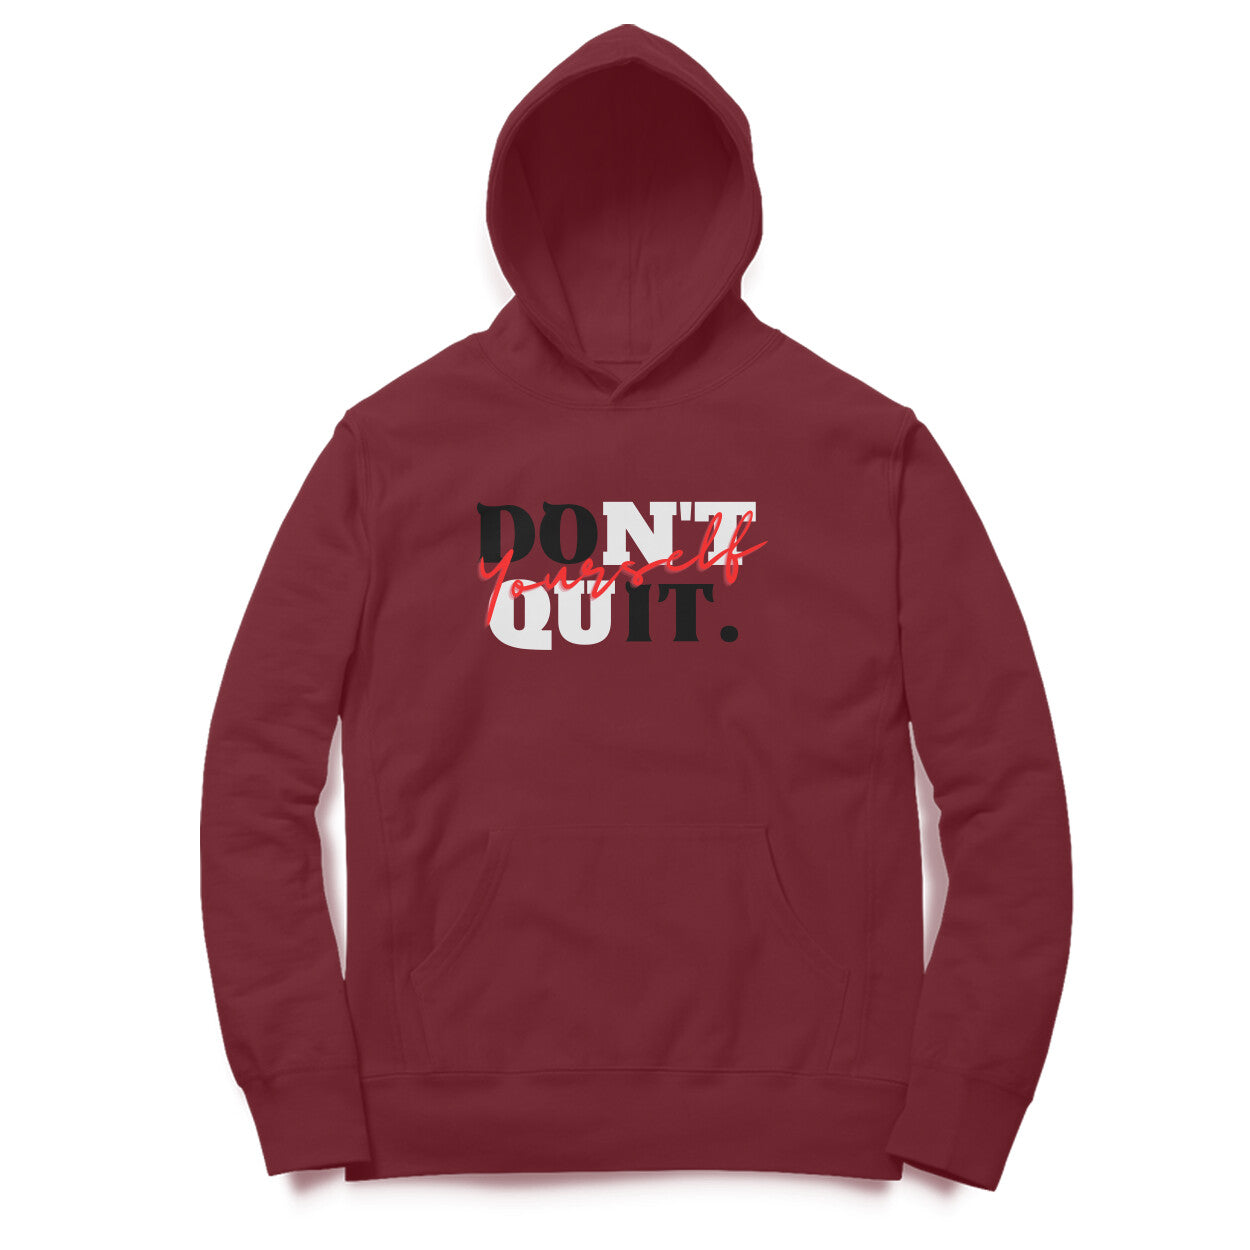 Don't Quit Yourself Hoodies